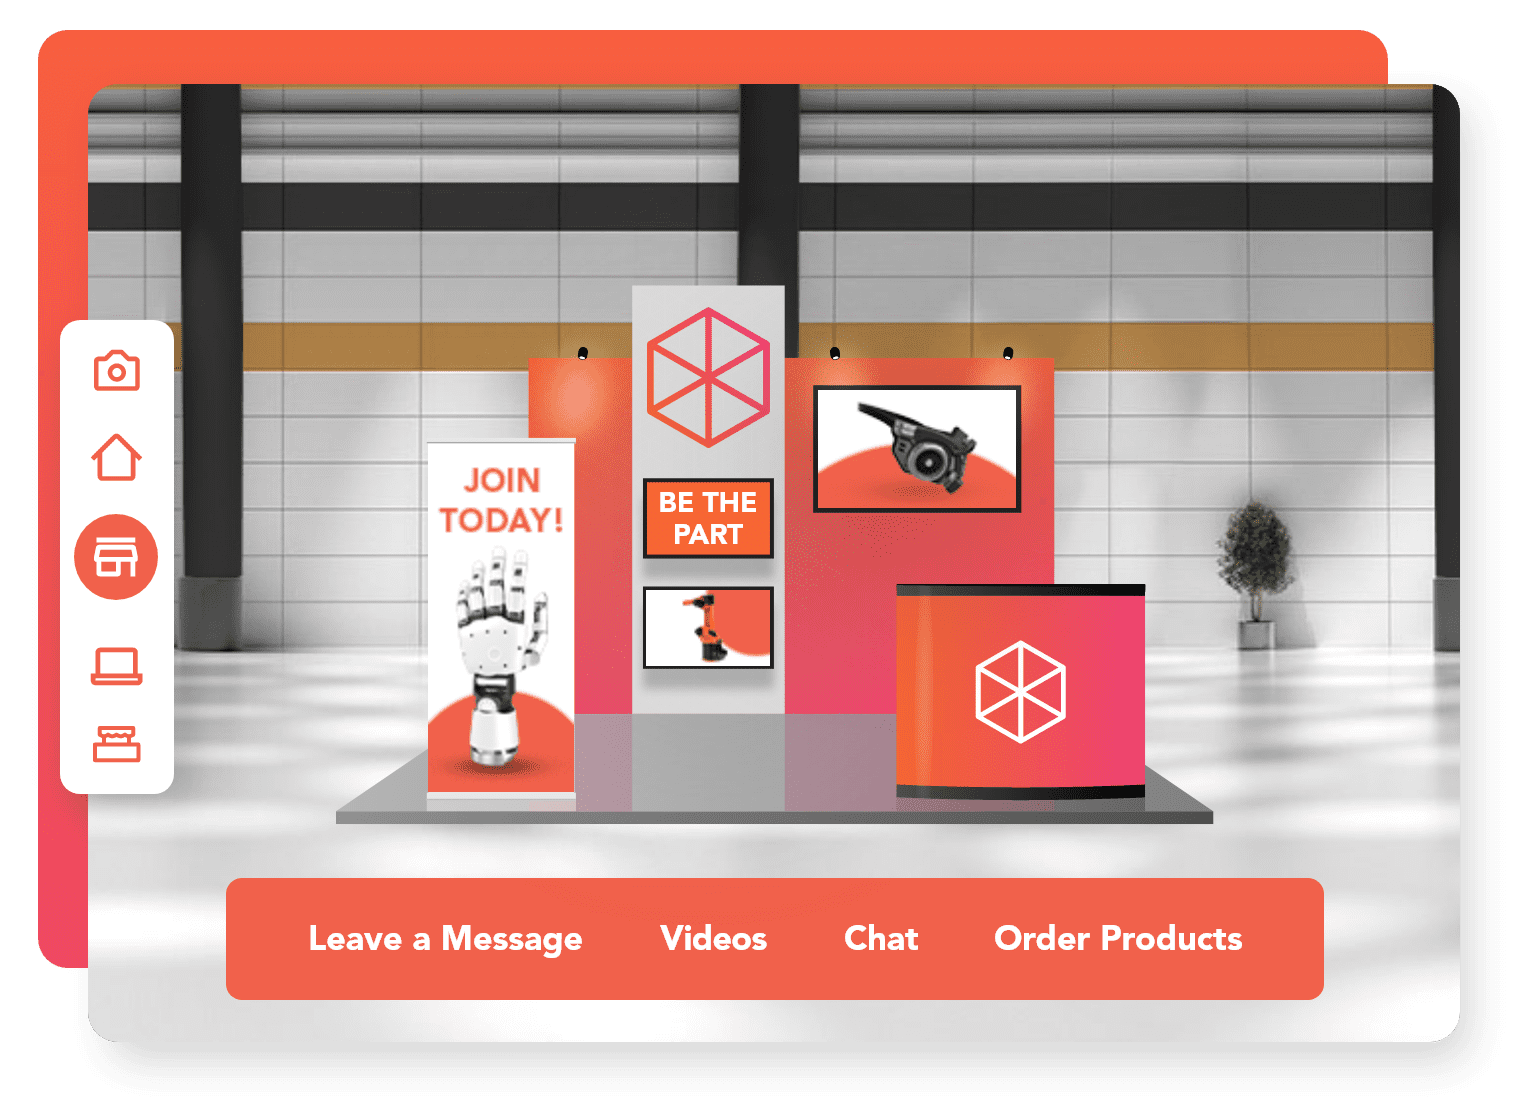 This illustration shows how a virtual trade show booth can look like